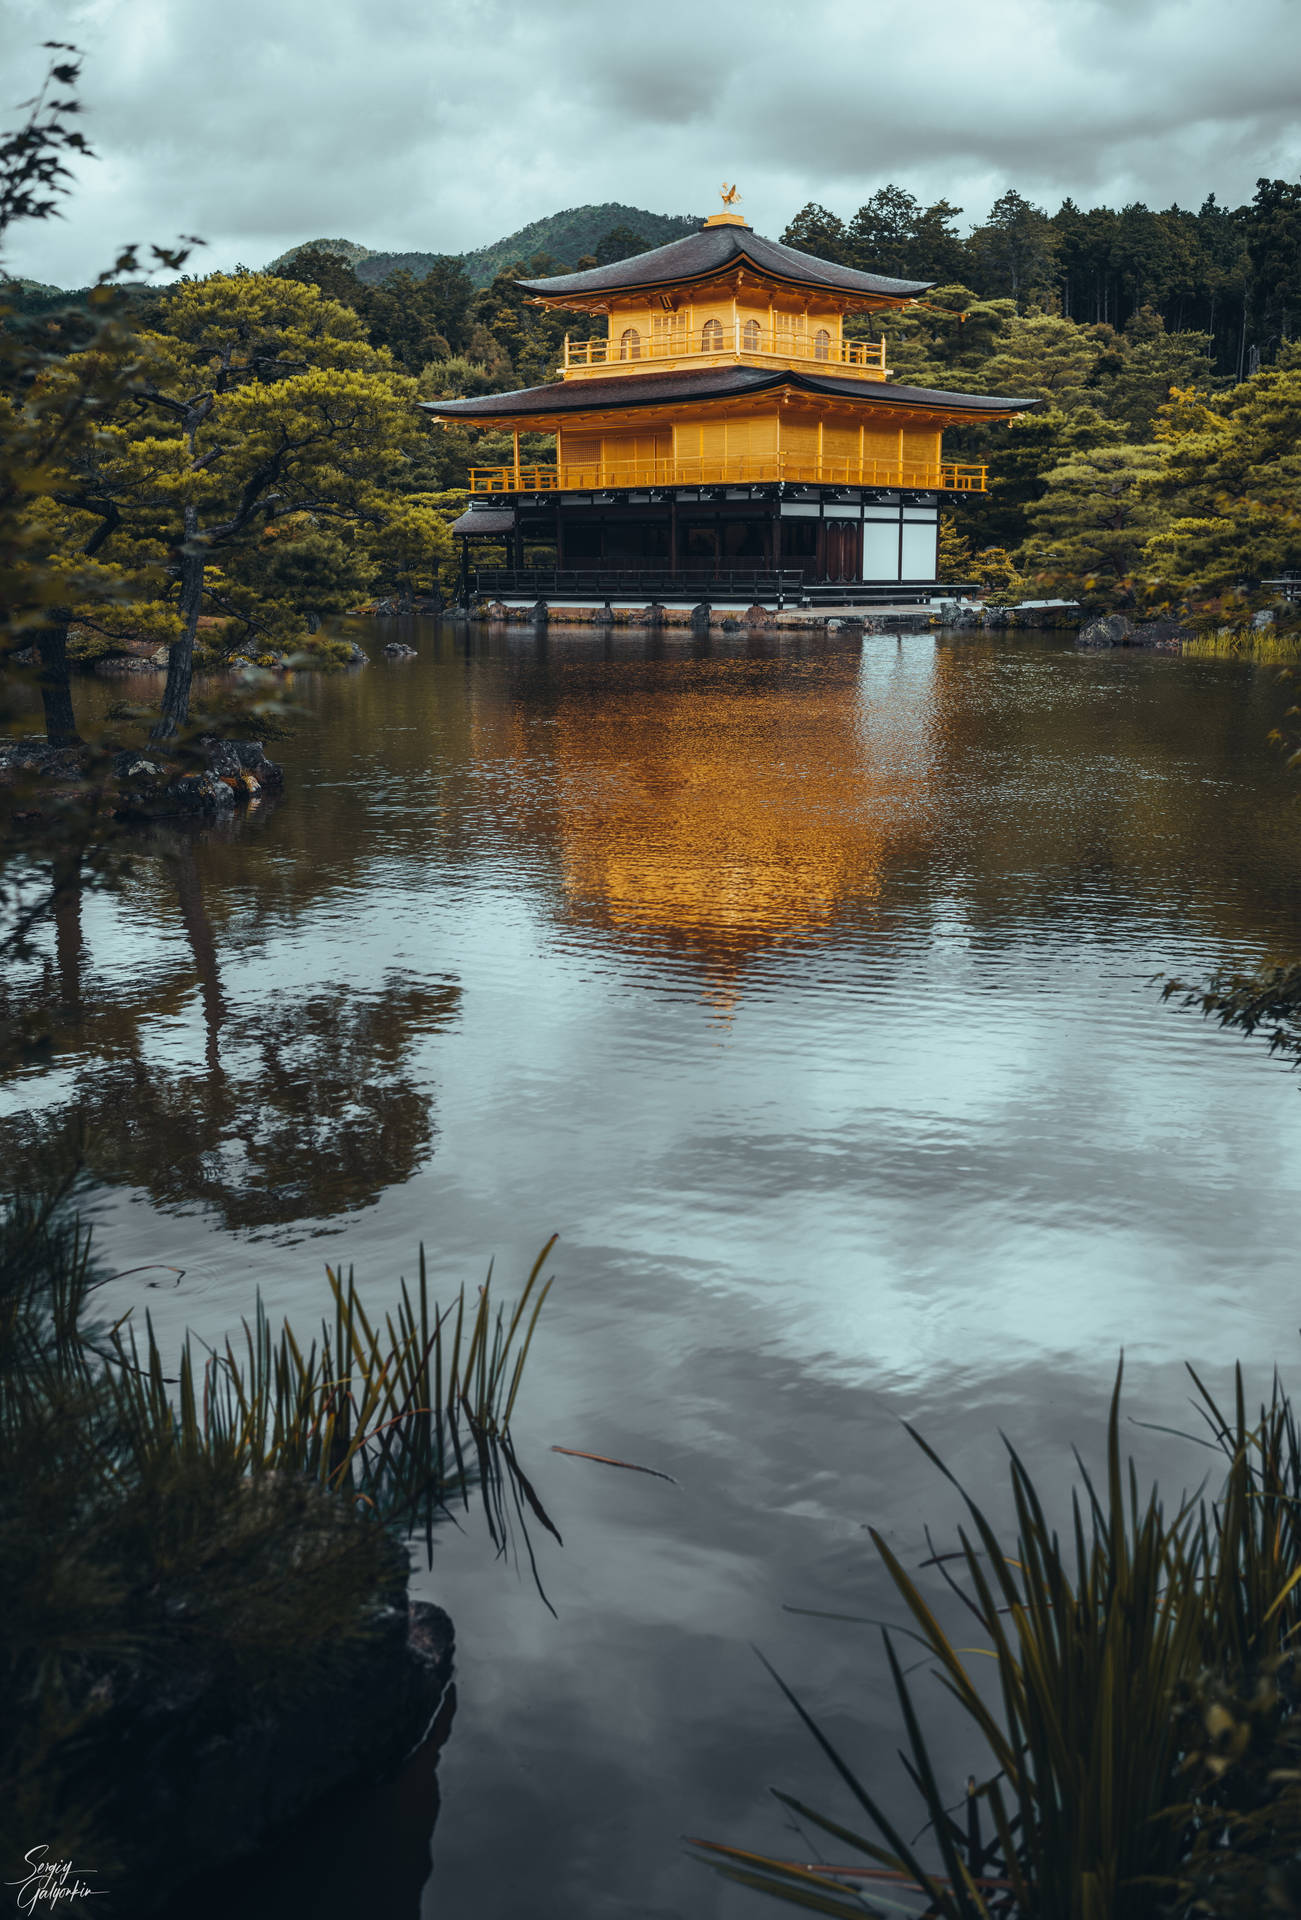 Golden Pavilion Scenery For Iphone Screens Wallpaper